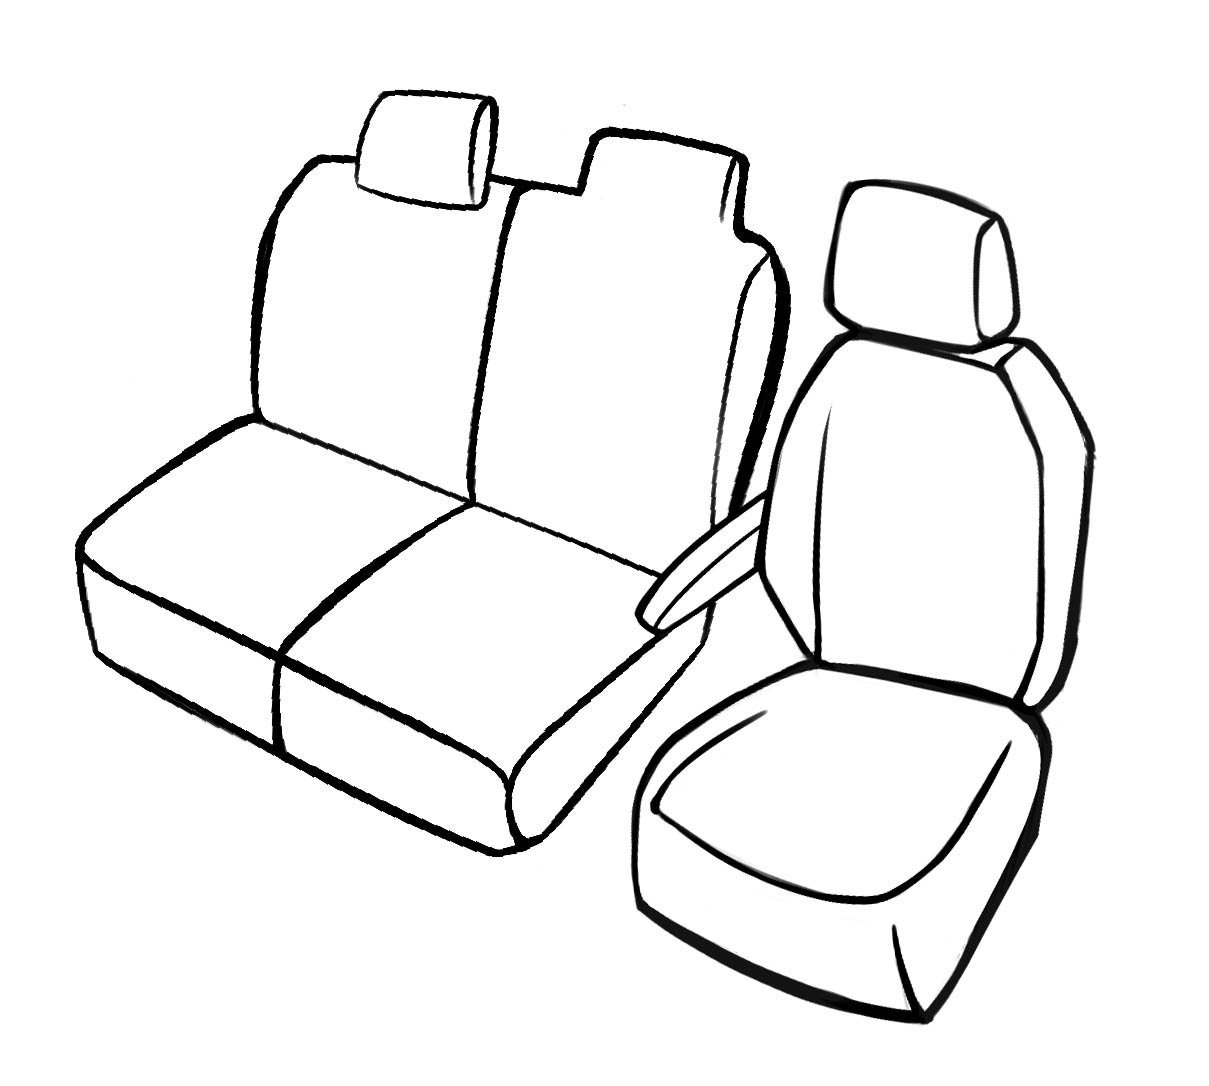 Premium Seat Cover for Peugeot Partner 09/2018-Today, 1 single seat cover front + armrest cover, 1 double bench cover